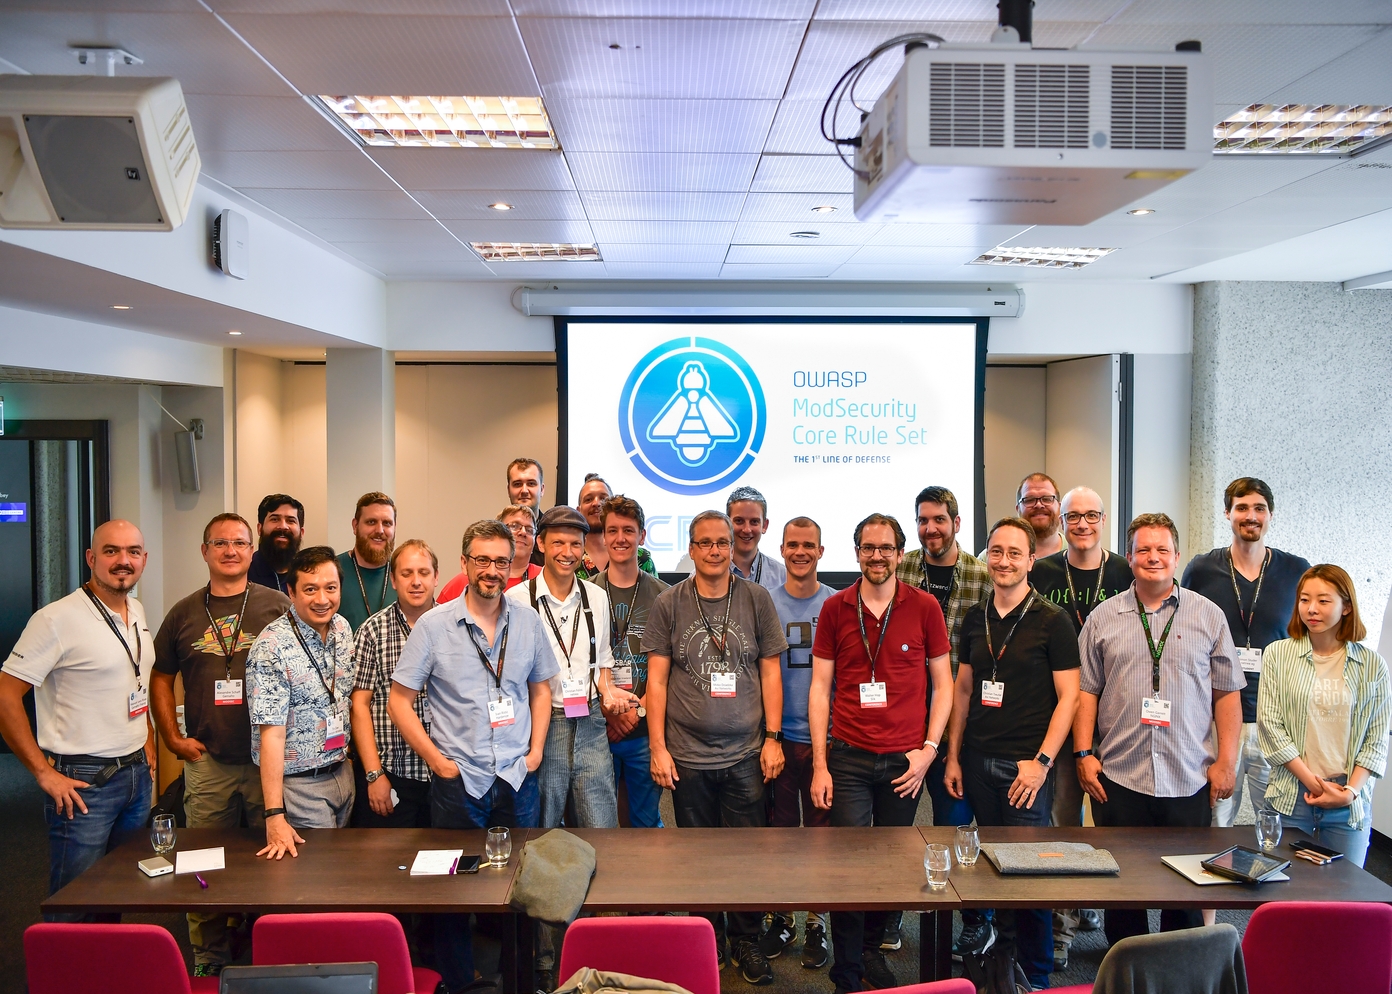 Group Photo from the CRS Community Summit 2018 in London